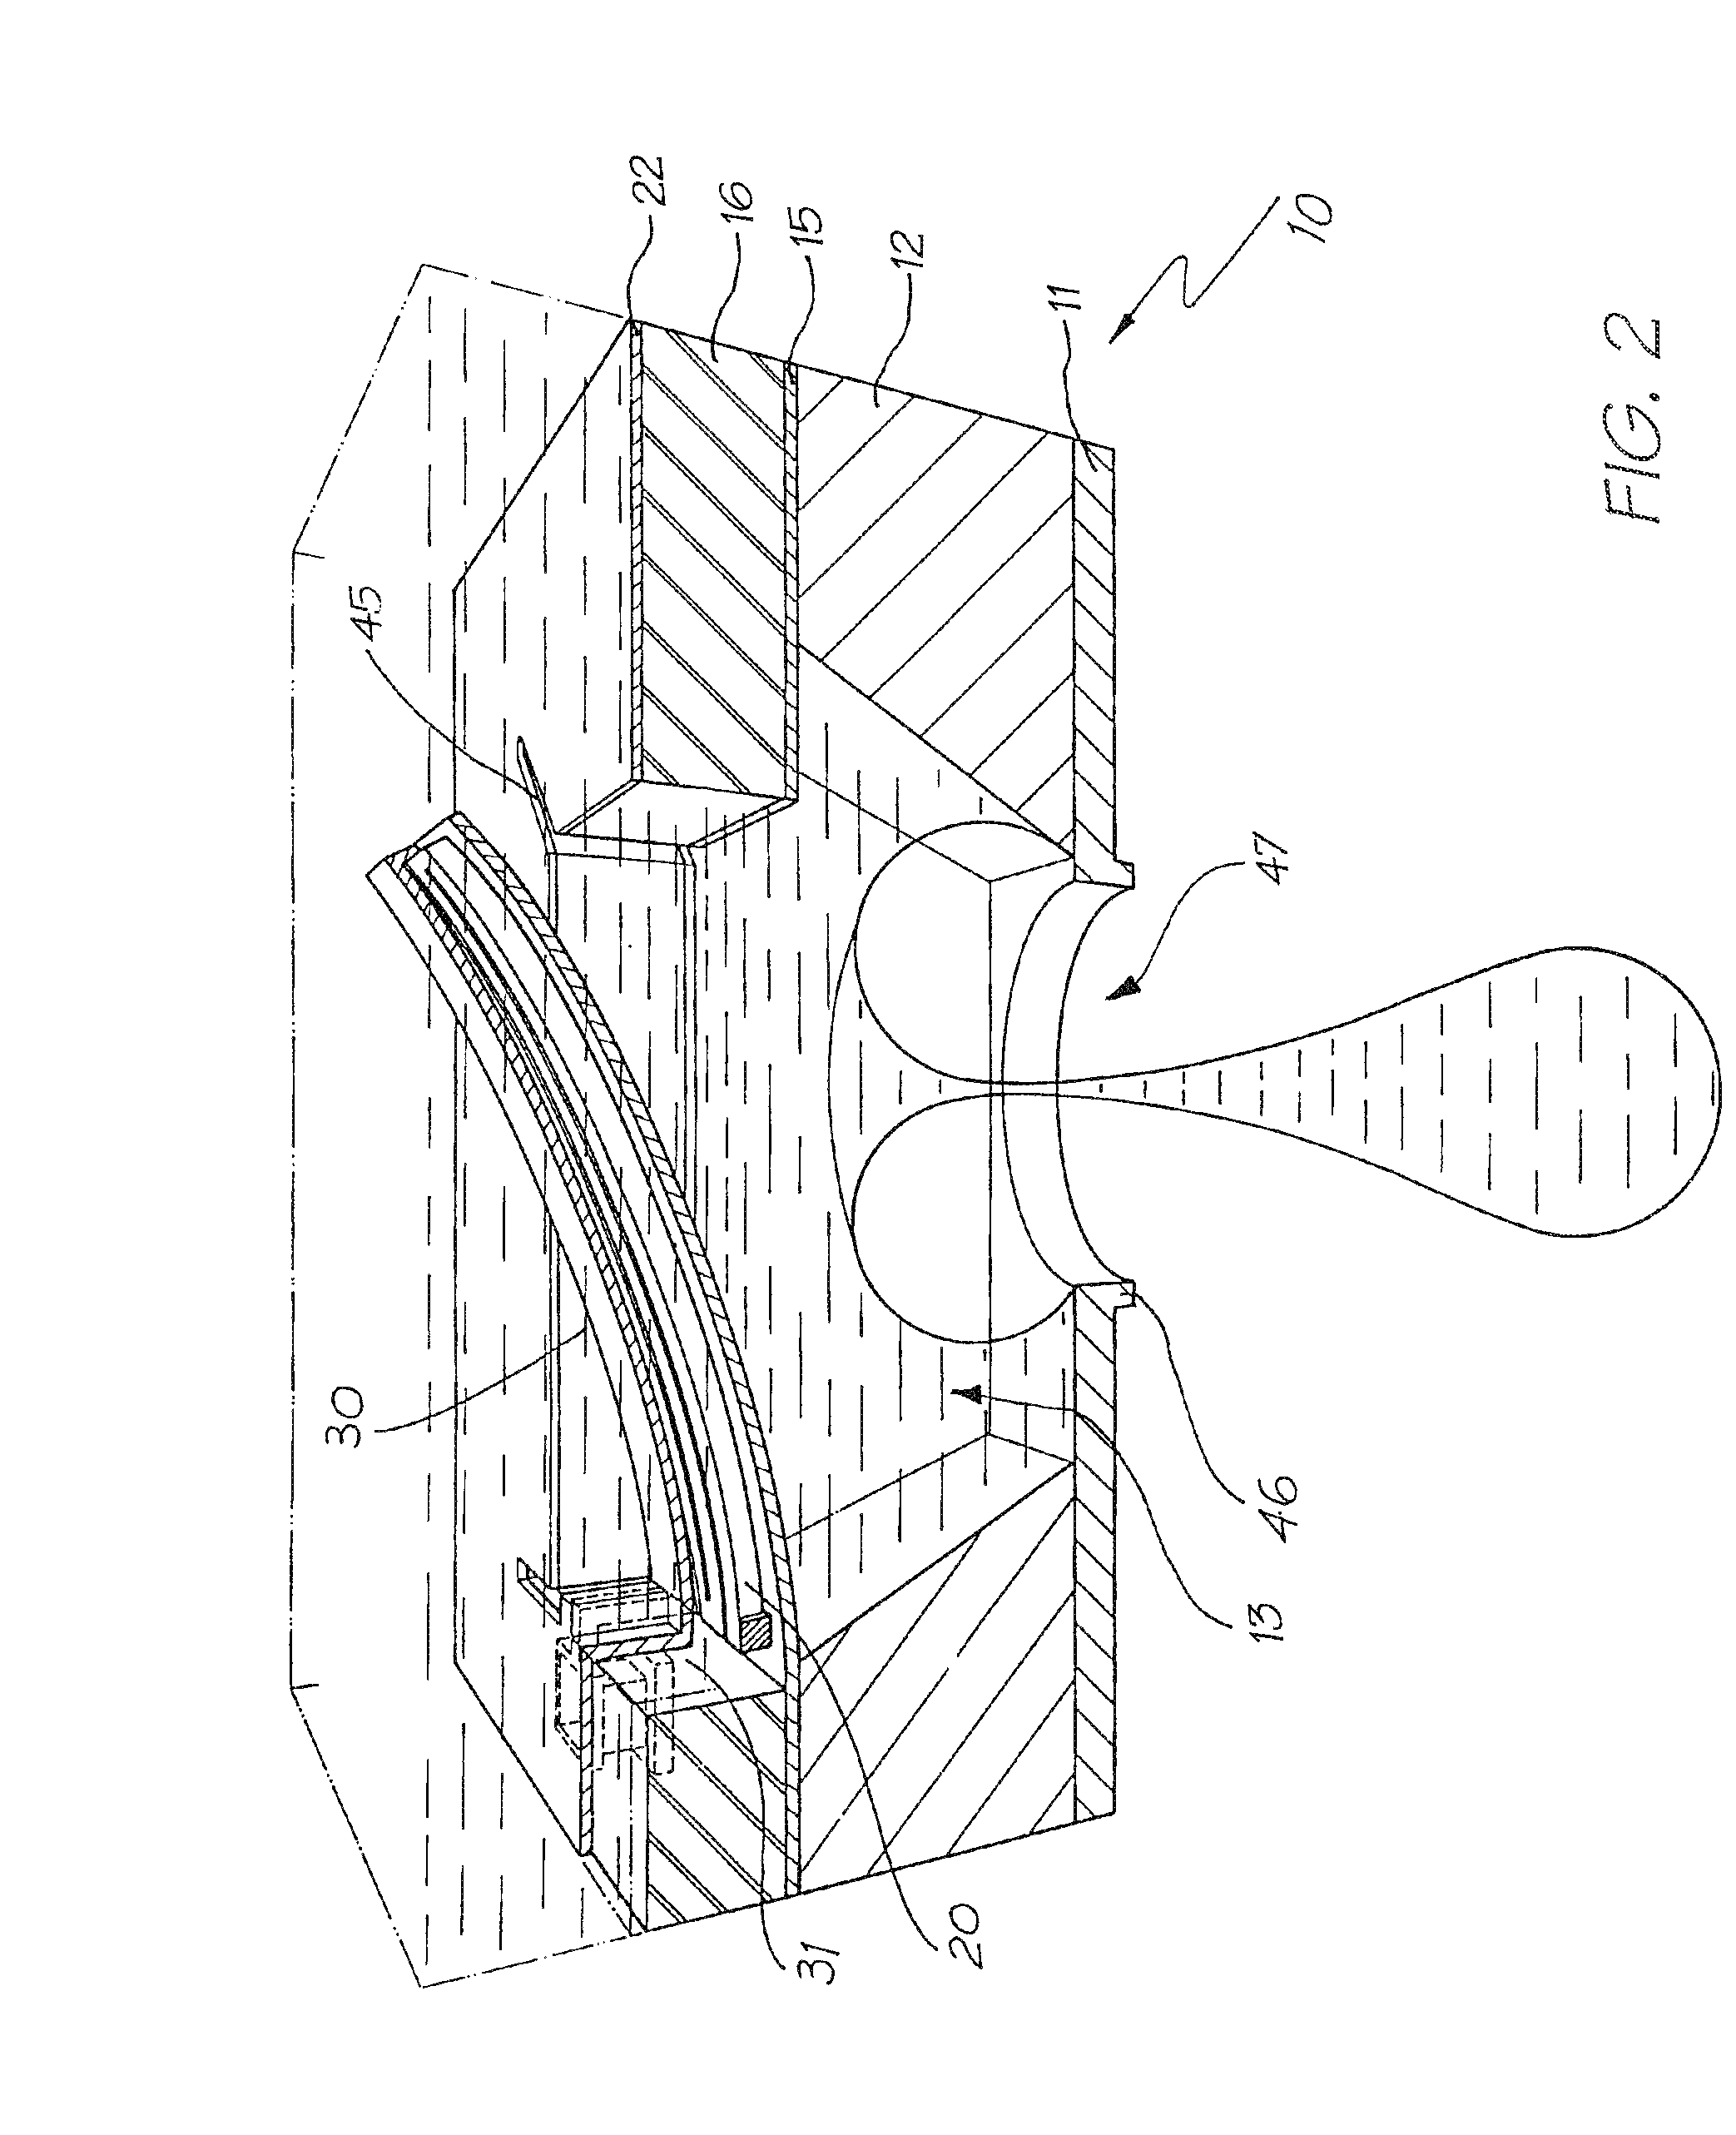 Printhead Integrated Circuit For Low Volume Droplet Ejection